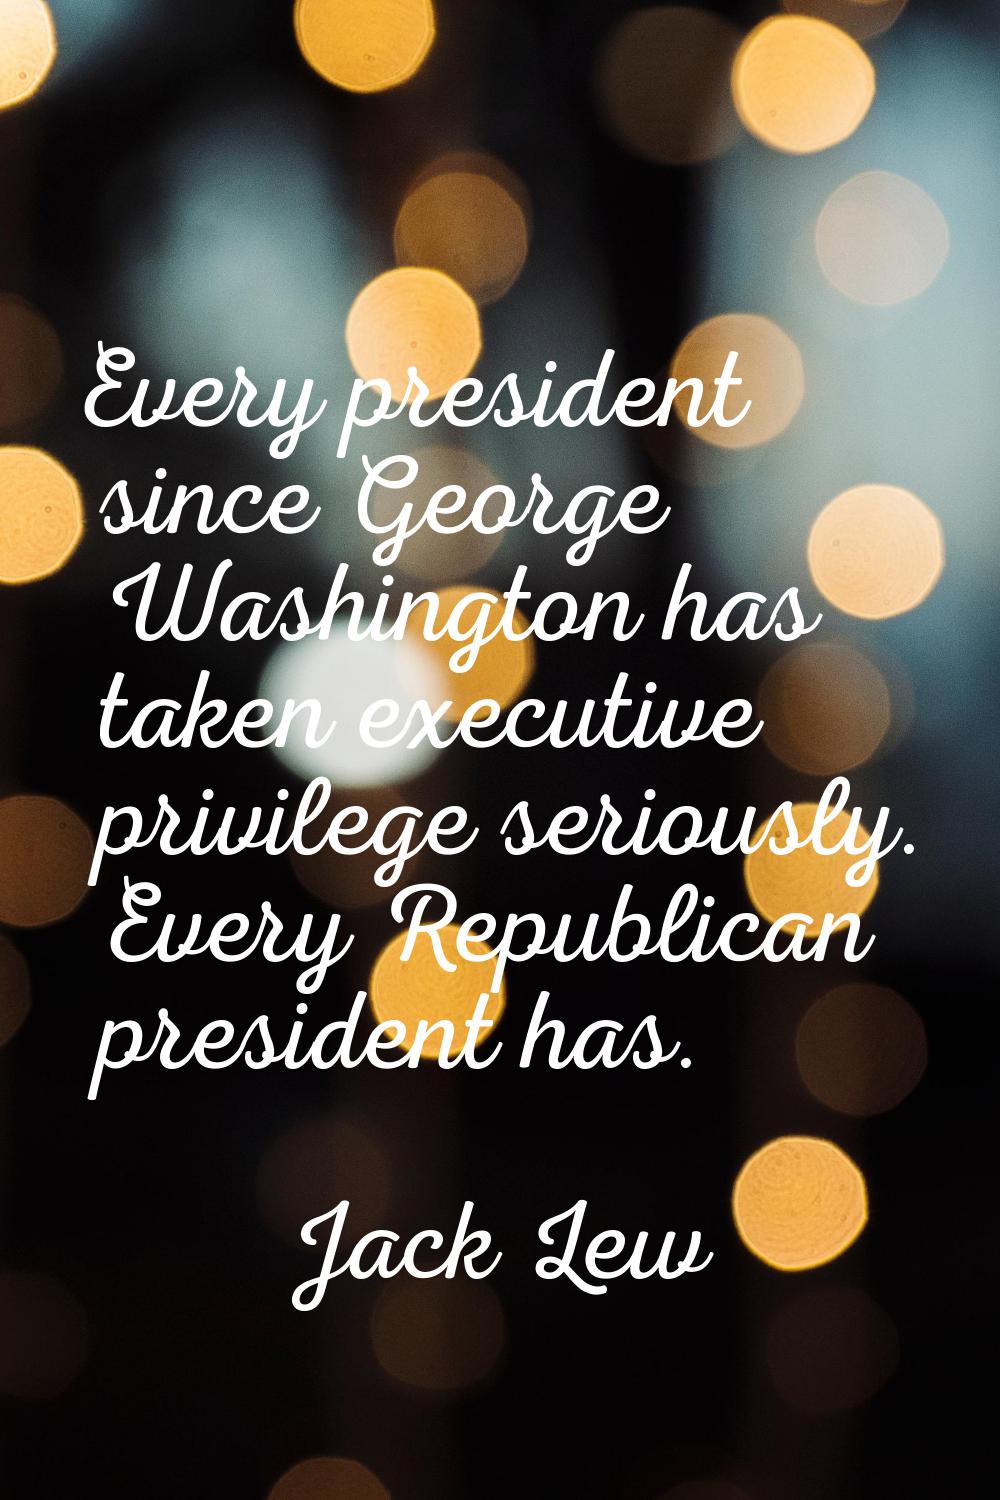 Every president since George Washington has taken executive privilege seriously. Every Republican p